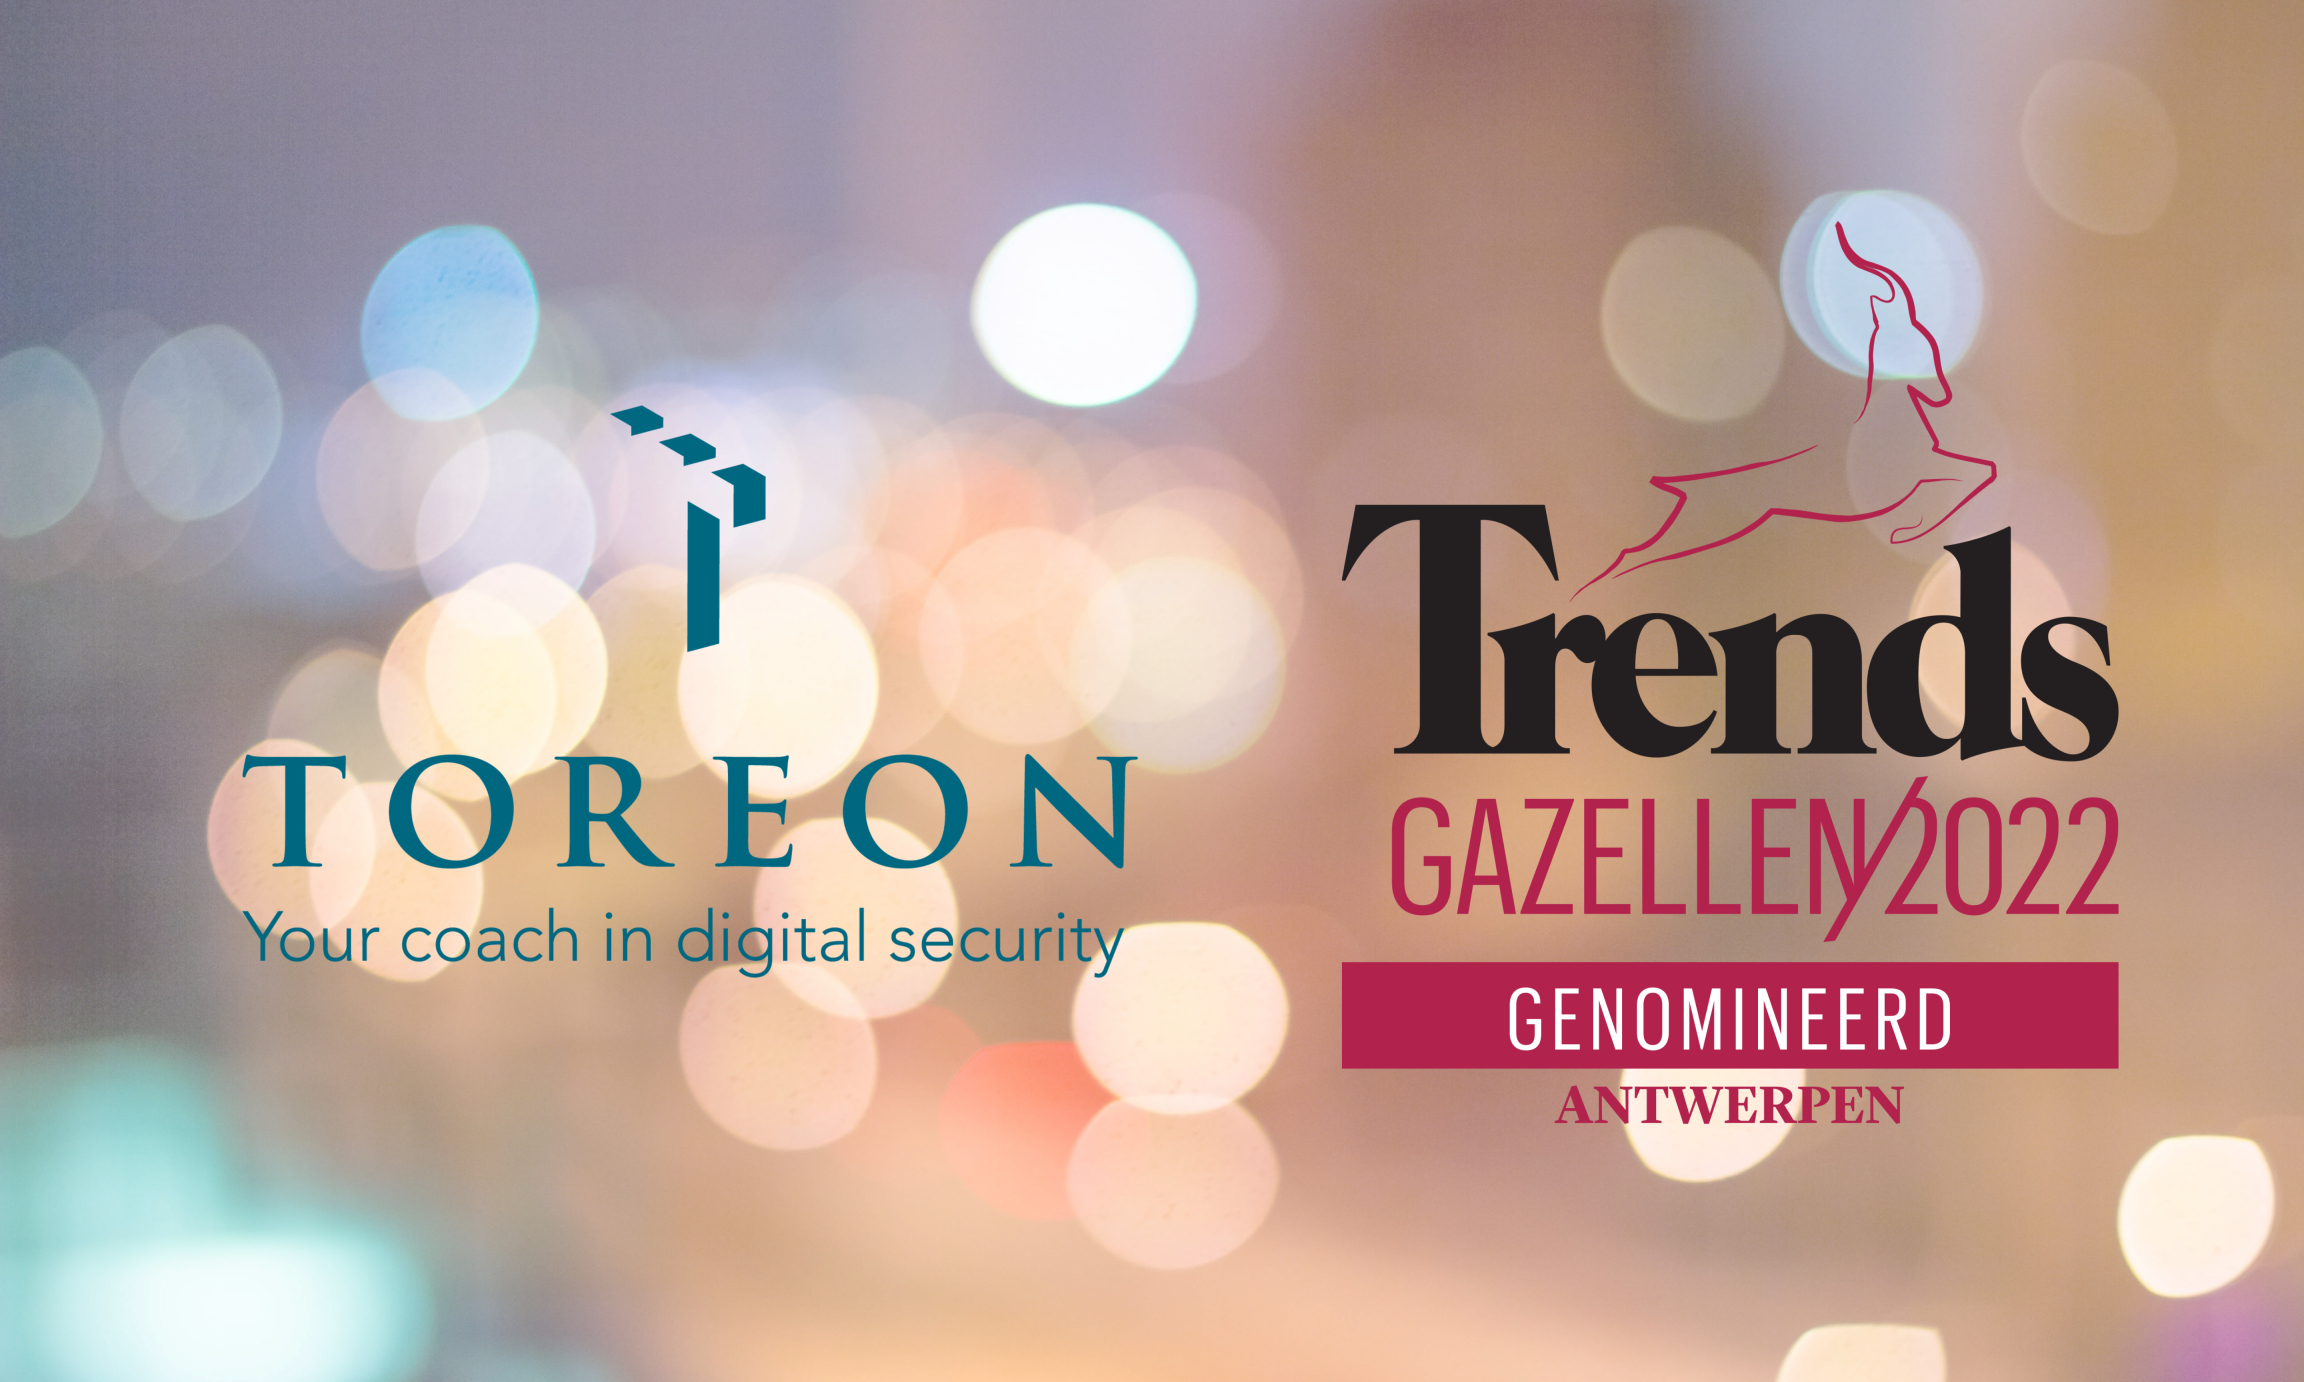 Toreon once again nominated as Trends Gazellen